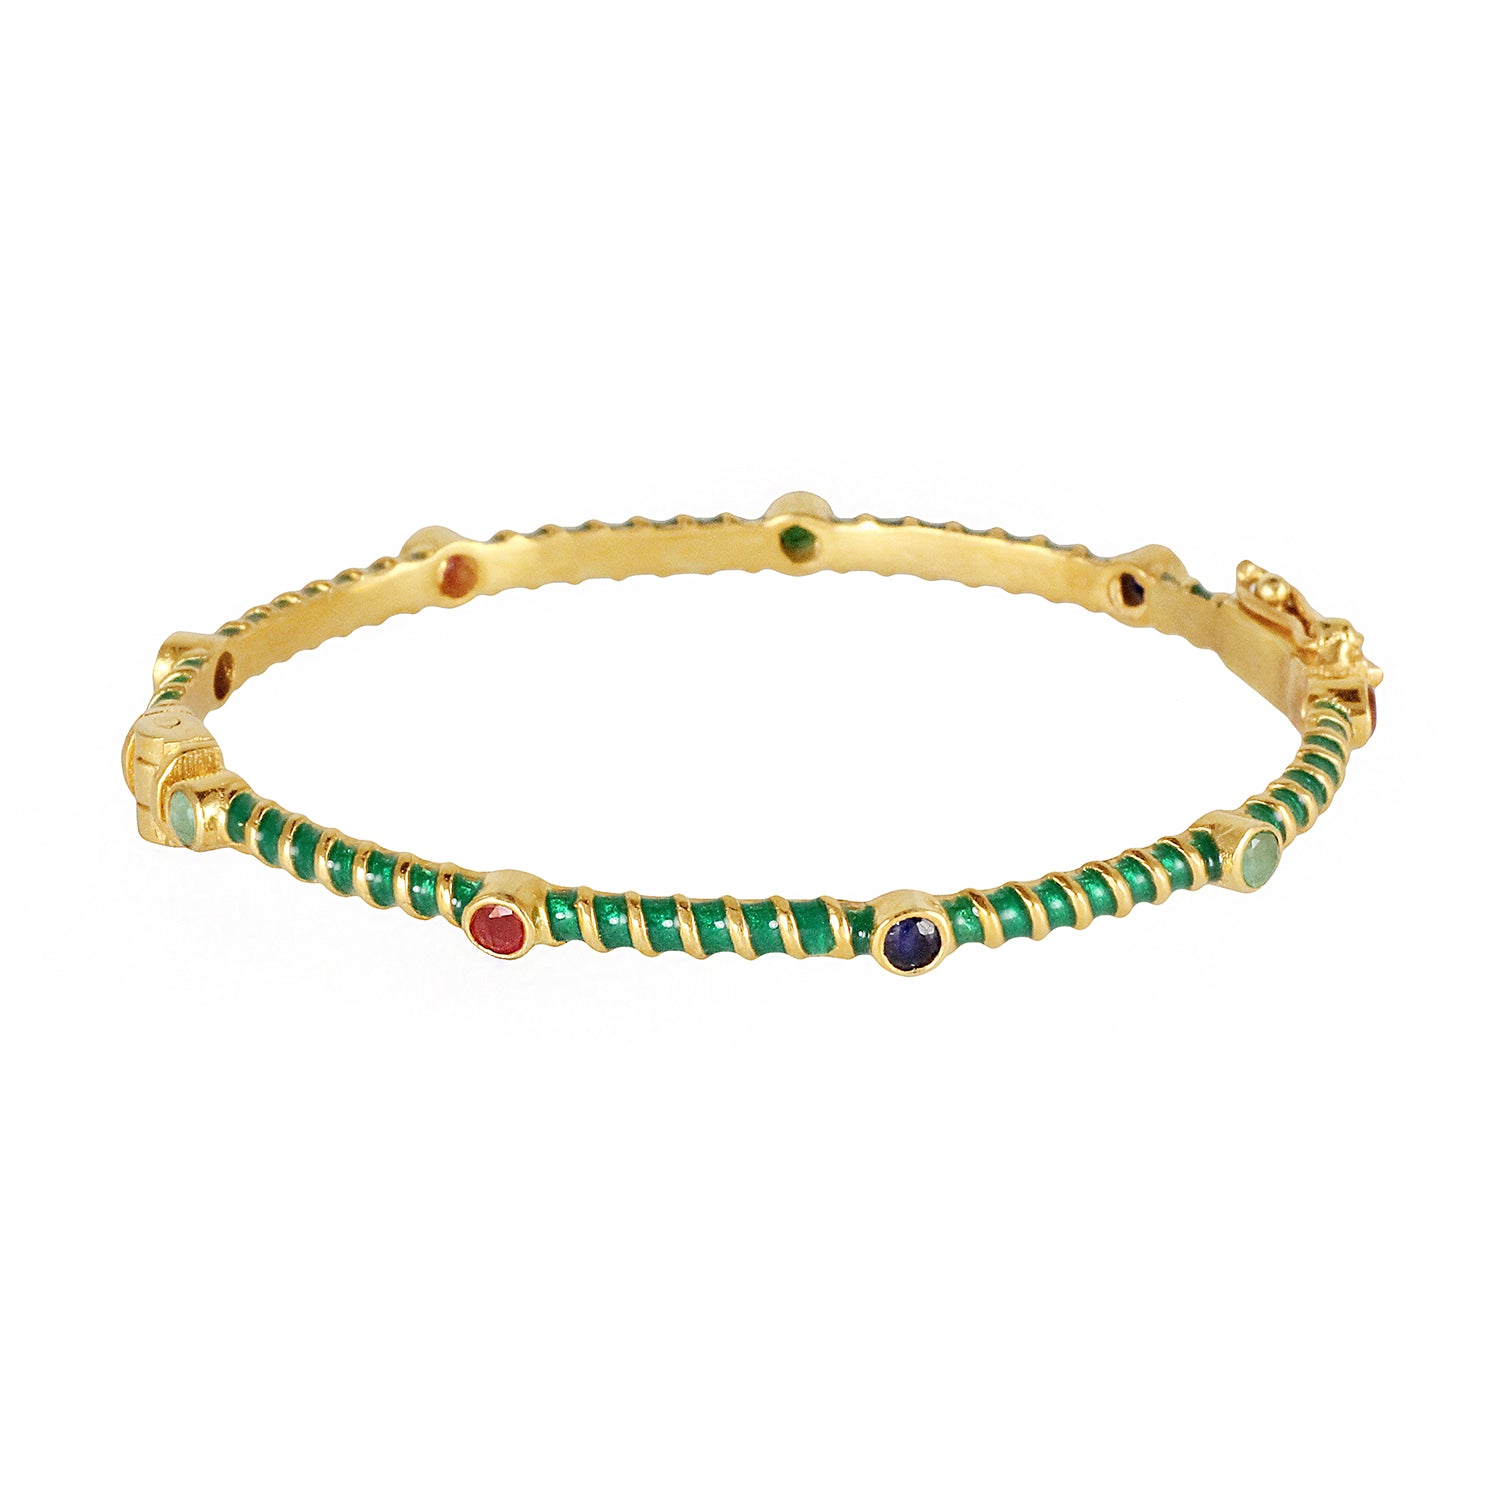 Silver gold plated with green enamel bracelet bangle together with semi precious stones made in India